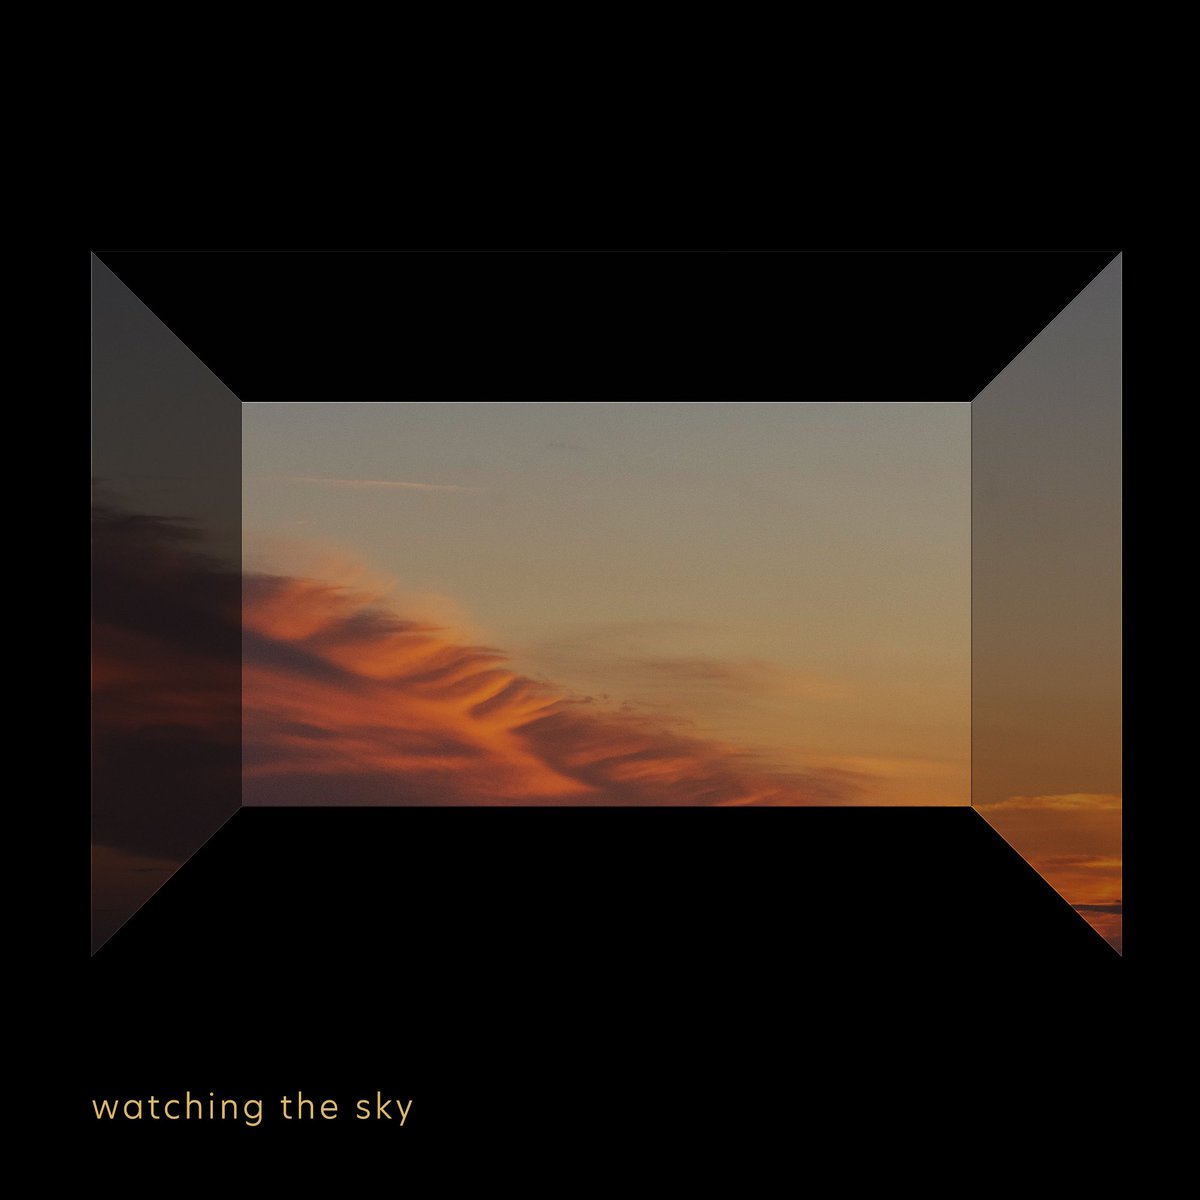 Release Day!! 😍 Watching The Sky feat @AnnaPhoebe @KlaraSchumann_ is now available on all platforms!!

Feels so good to get new music out into the world! 🌎 Between so many other projects finding pockets of time to write personal music is never easy!

More to come soon 👀